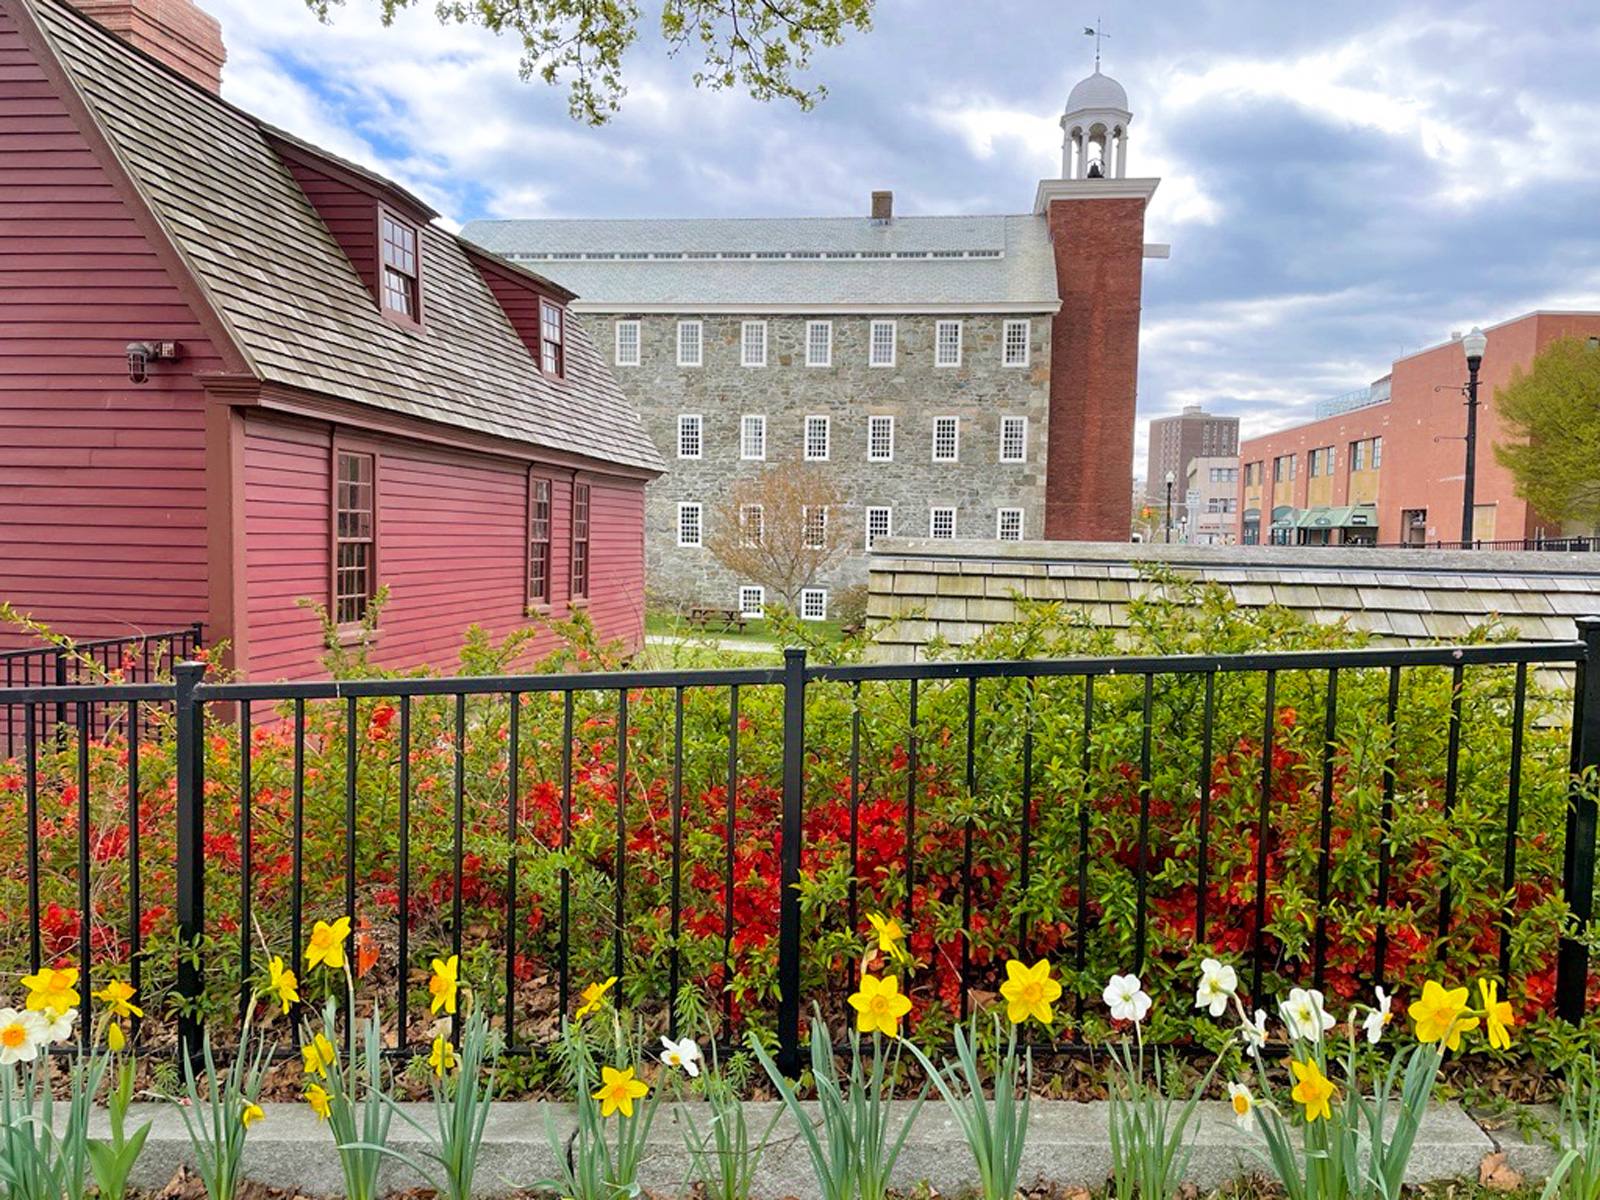 Spring day at Brown house and Wilkinson Mill filled with flowers